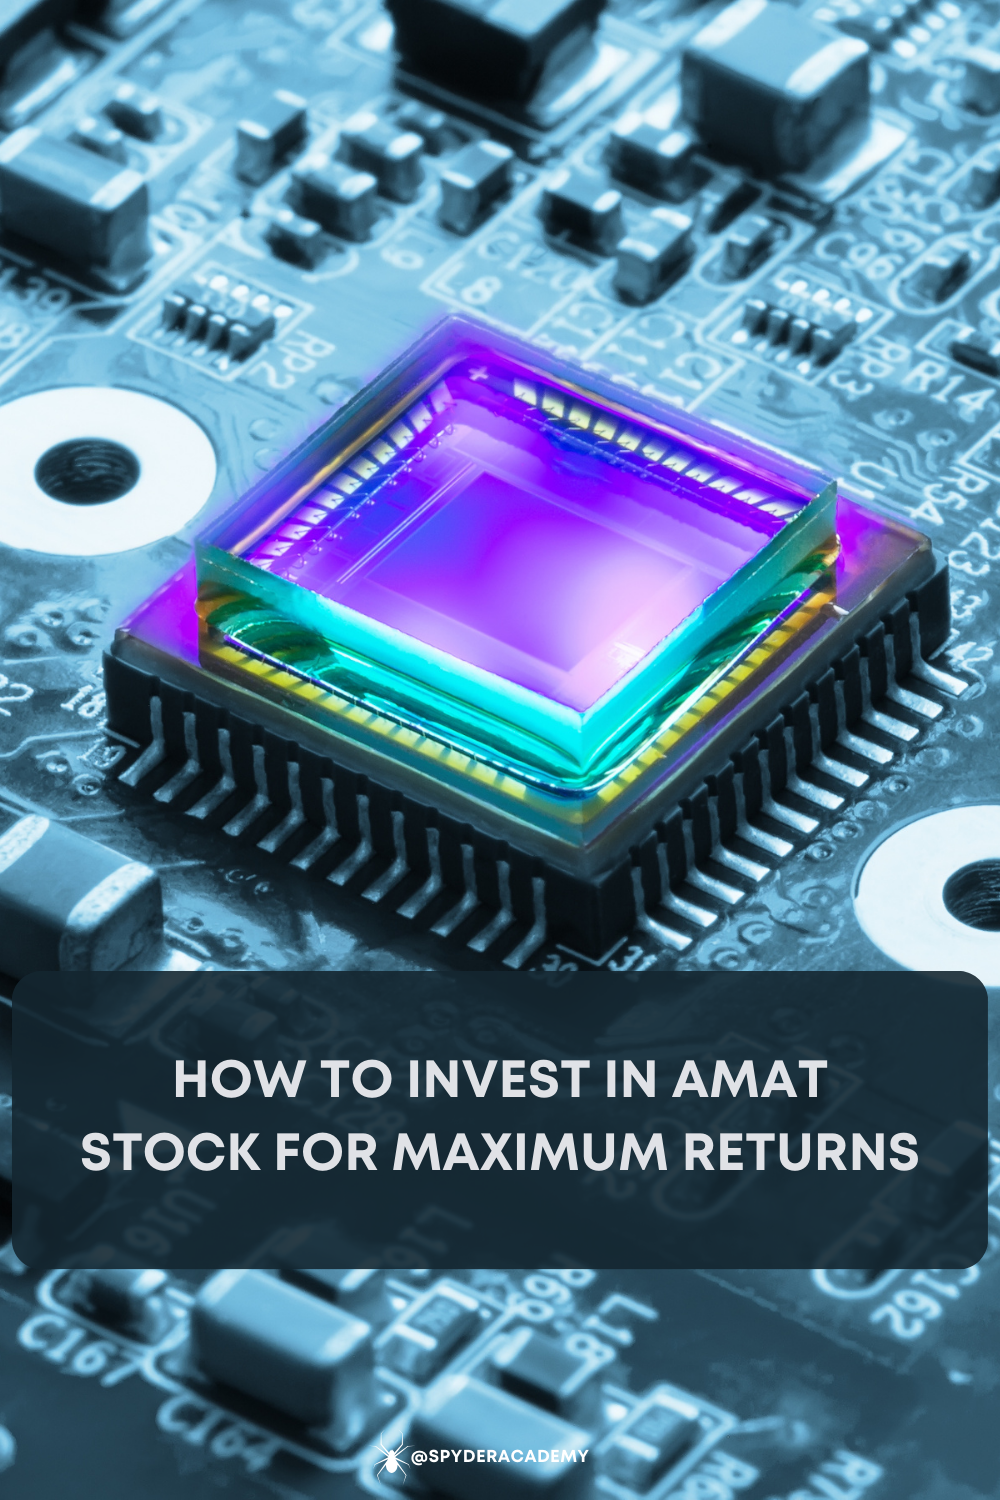 Find the latest information about trading AMAT stock for a full financial overview to help with your stock trading and investing.